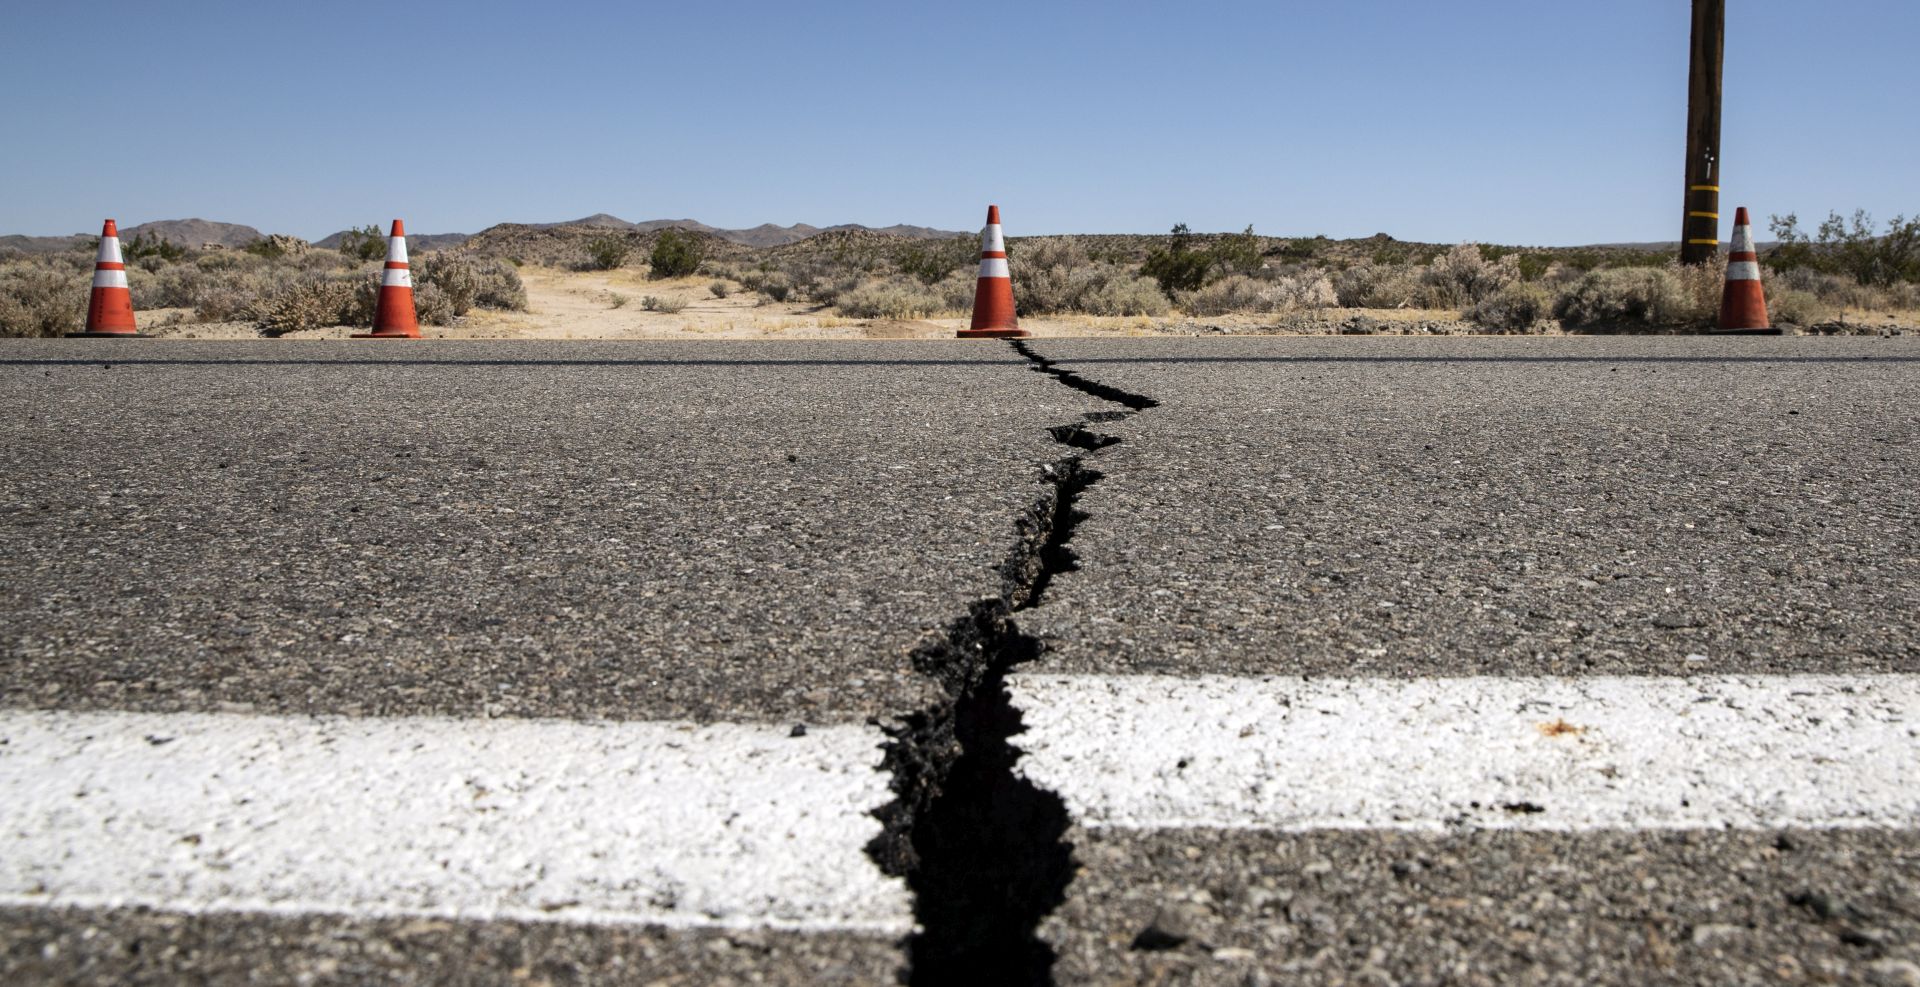 epaselect epa07695842 A cone indicates the localization of a crack in the road after an earthquake near Ridgecrest shook Southern California, USA, 04 July 2019. Earlier on the same day, a magnitude 6.4 earthquake shook Southern California. It's epicenter is located 150 miles north of Los Angeles near the cities of Ridgecrest and Trona.  EPA/ETIENNE LAURENT